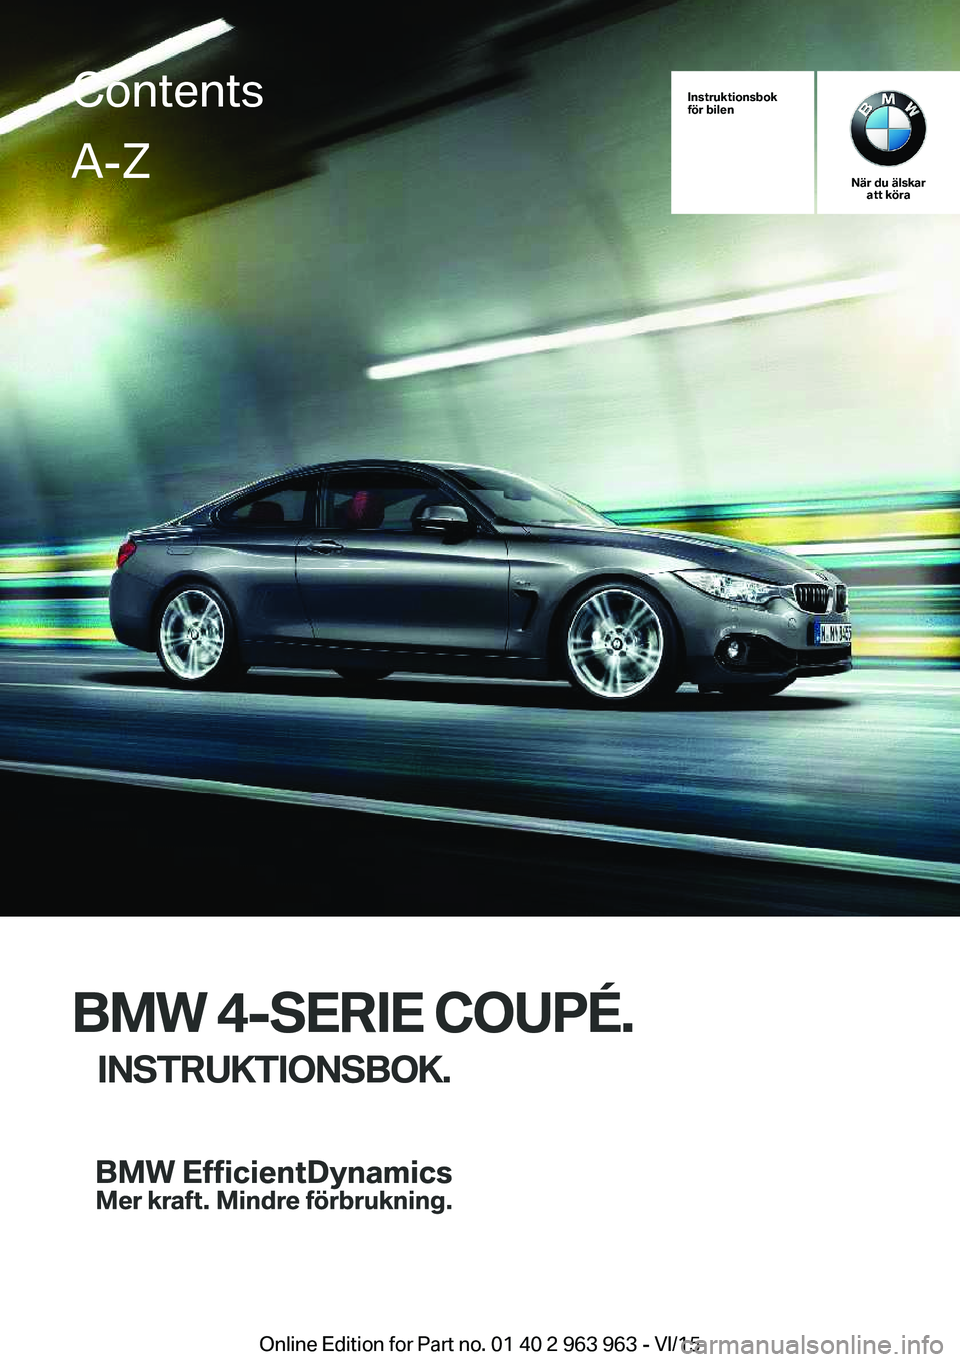 BMW 4 SERIES COUPE 2016  InstruktionsbÖcker (in Swedish) 